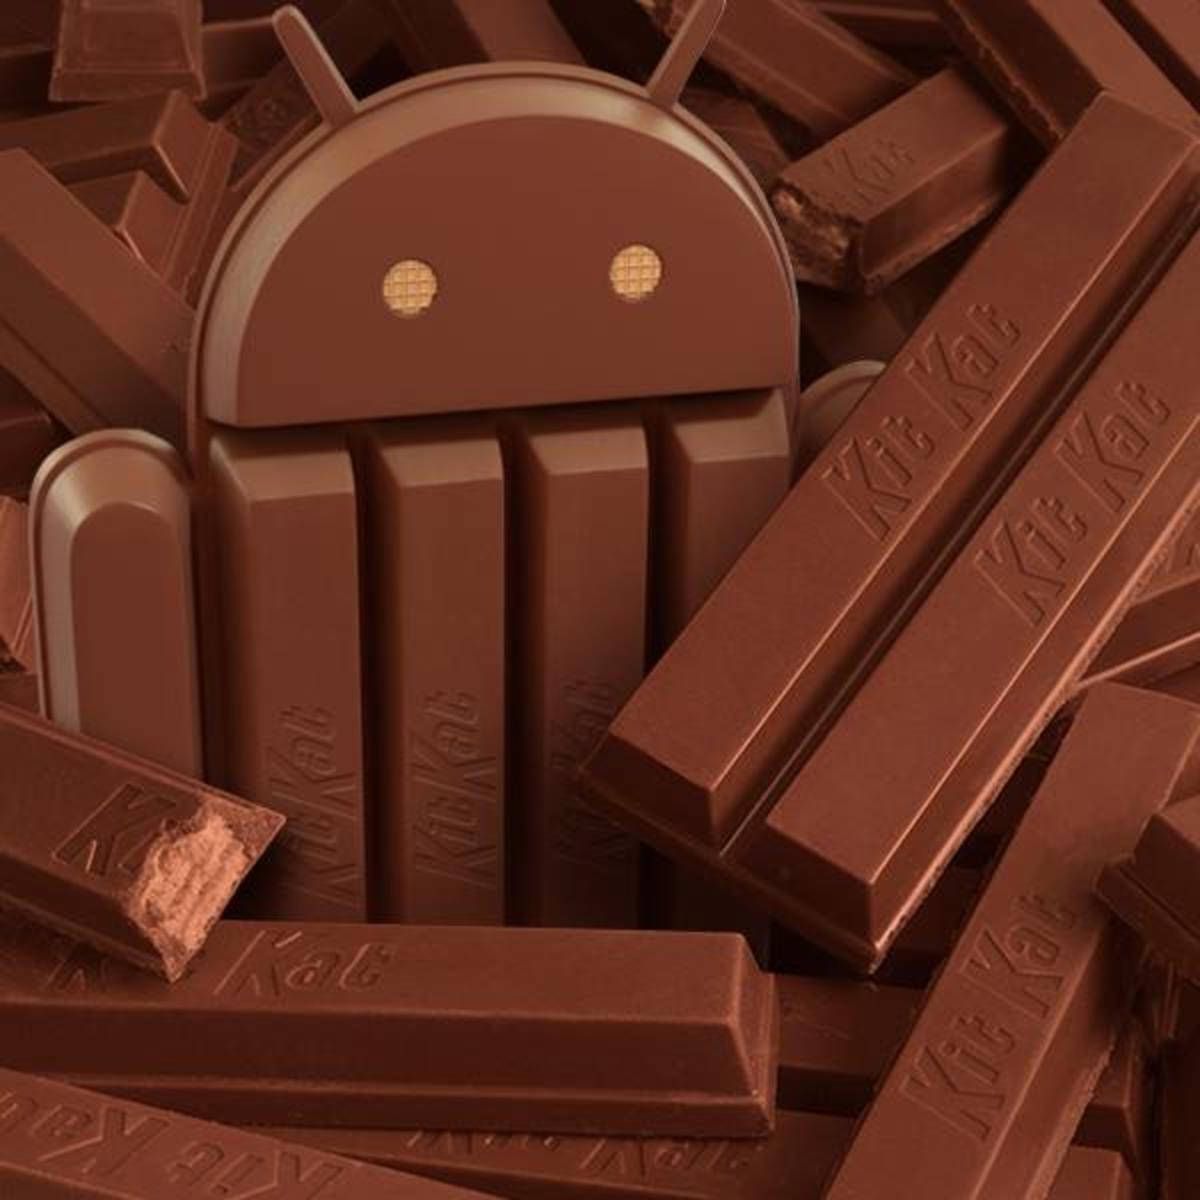 Free Chocolate Wallpaper Downloads, Chocolate Wallpaper for FREE